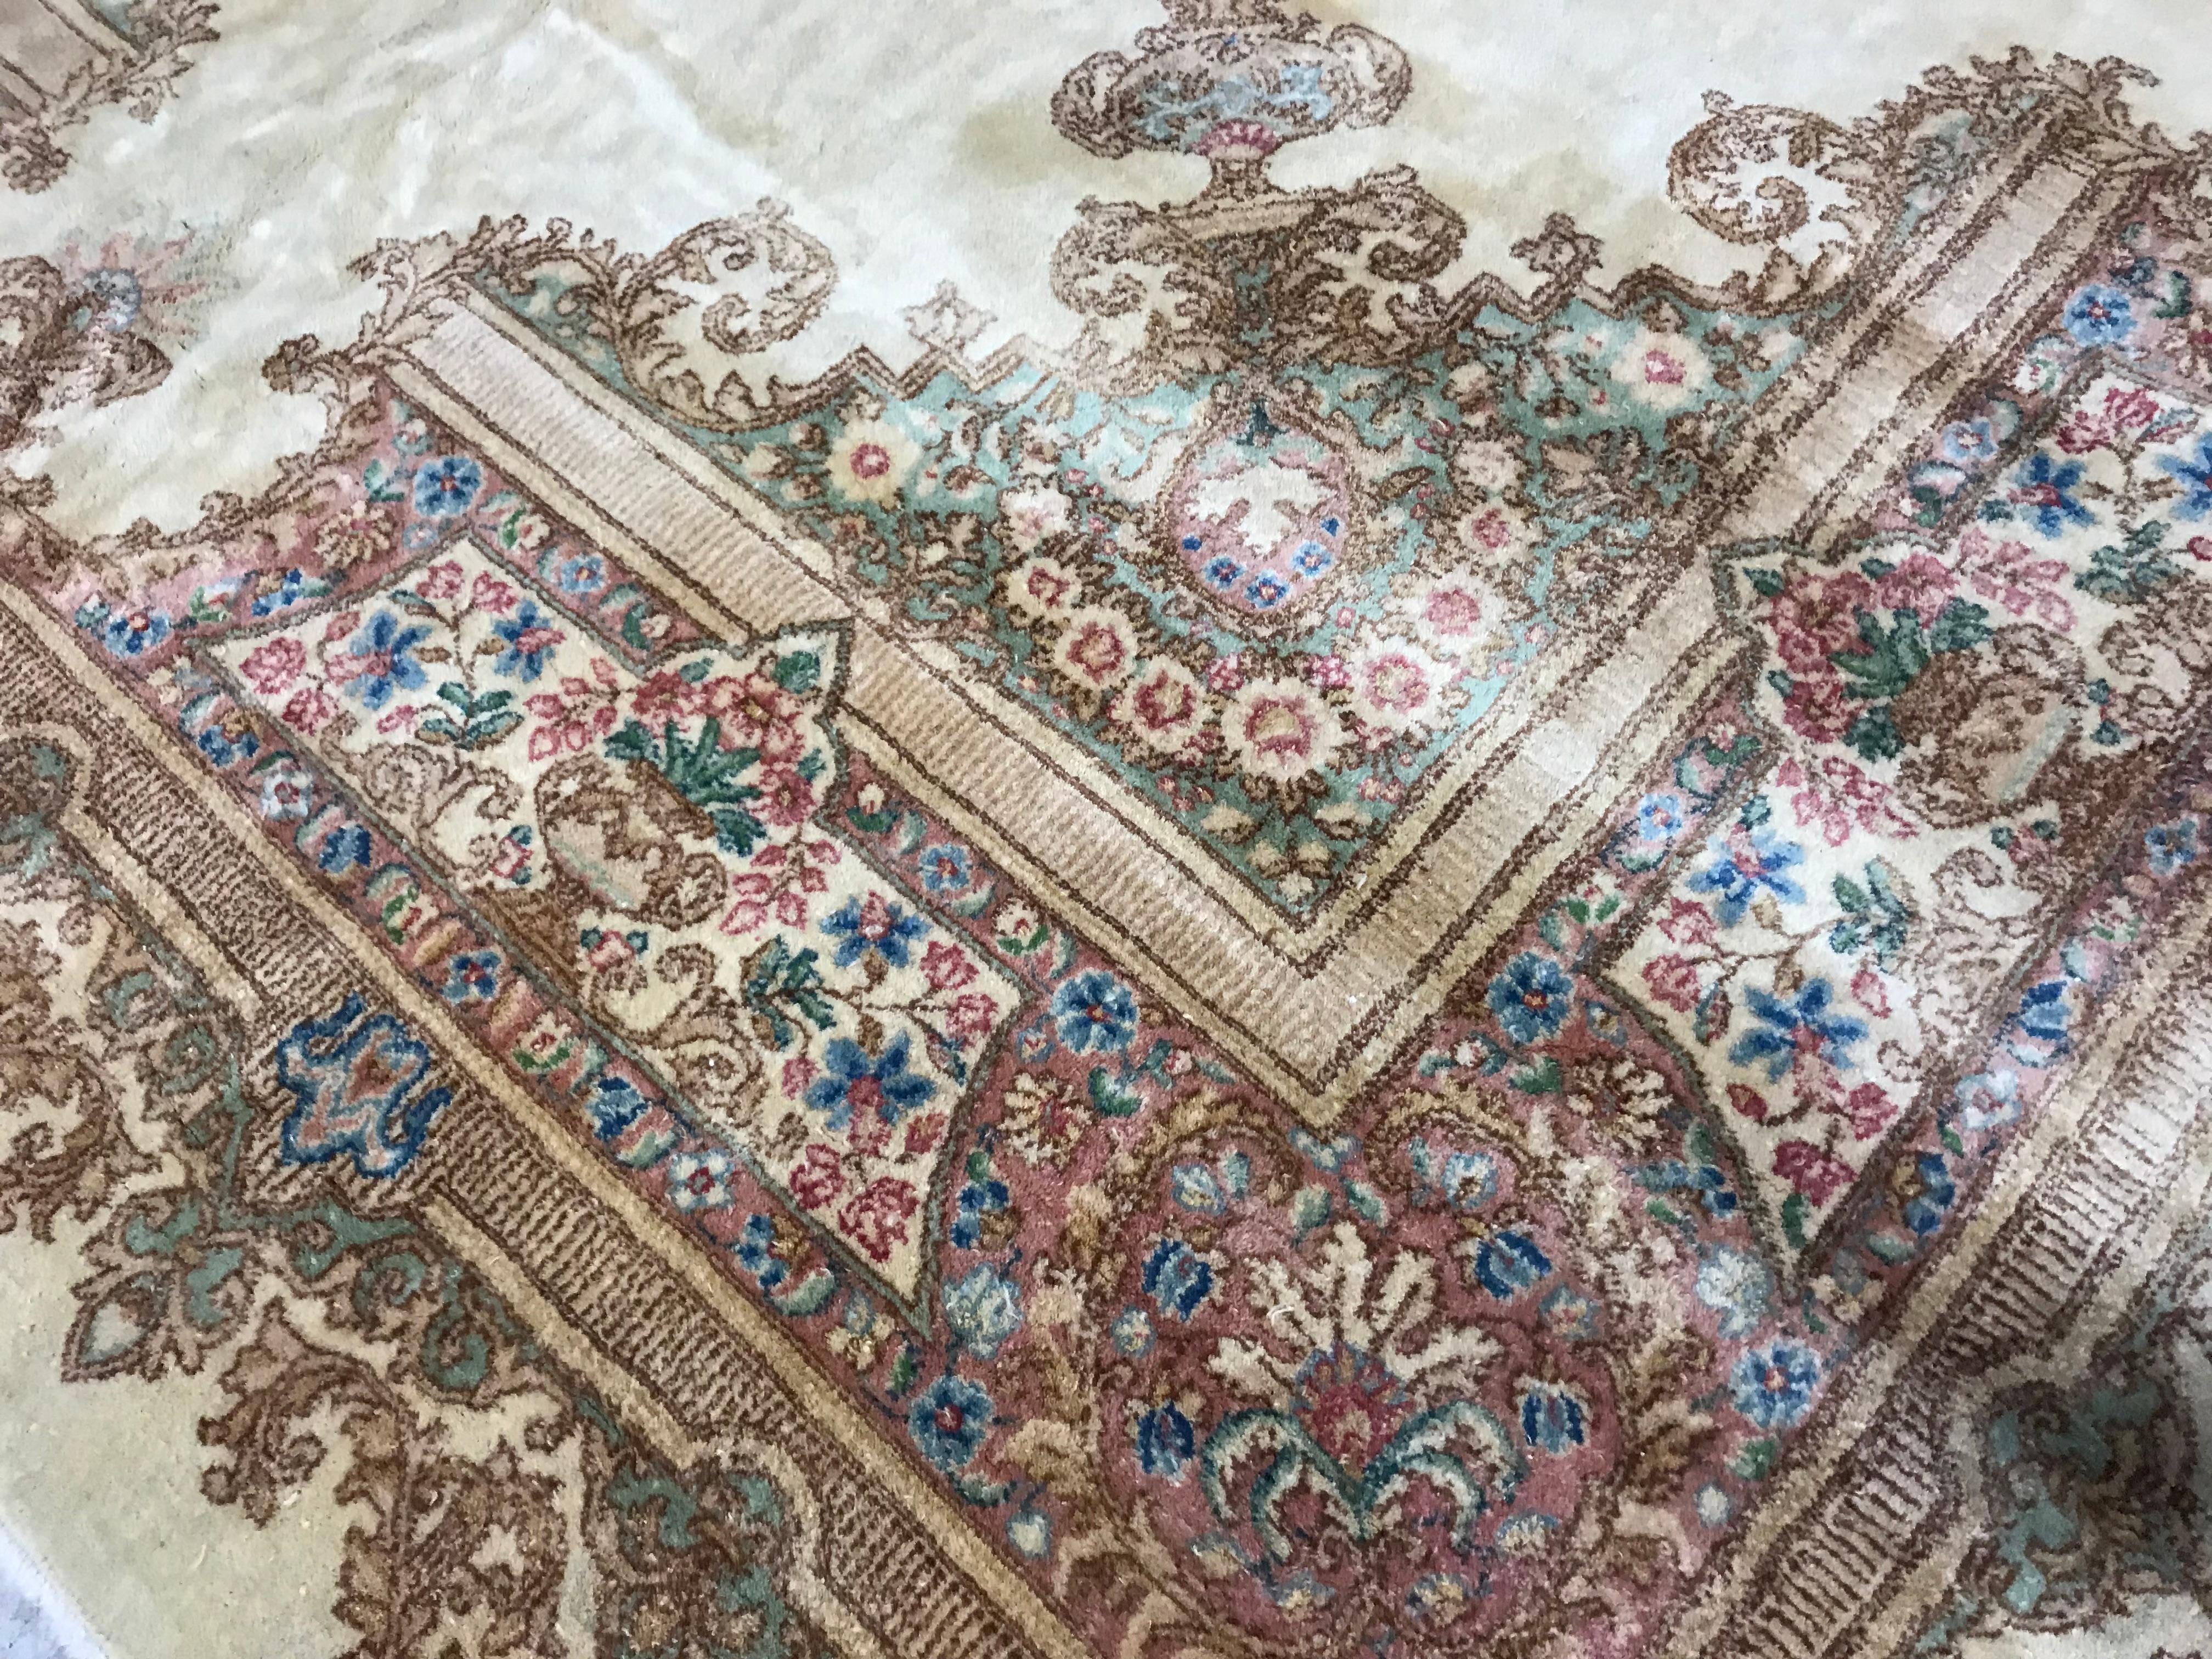 Vintage Square Persian Kerman Rug circa 1940. A wonderful square Kerman rug with an ivory ground having a central medallion with the floral theme continuing into the corners and borders of this light and airy piece.